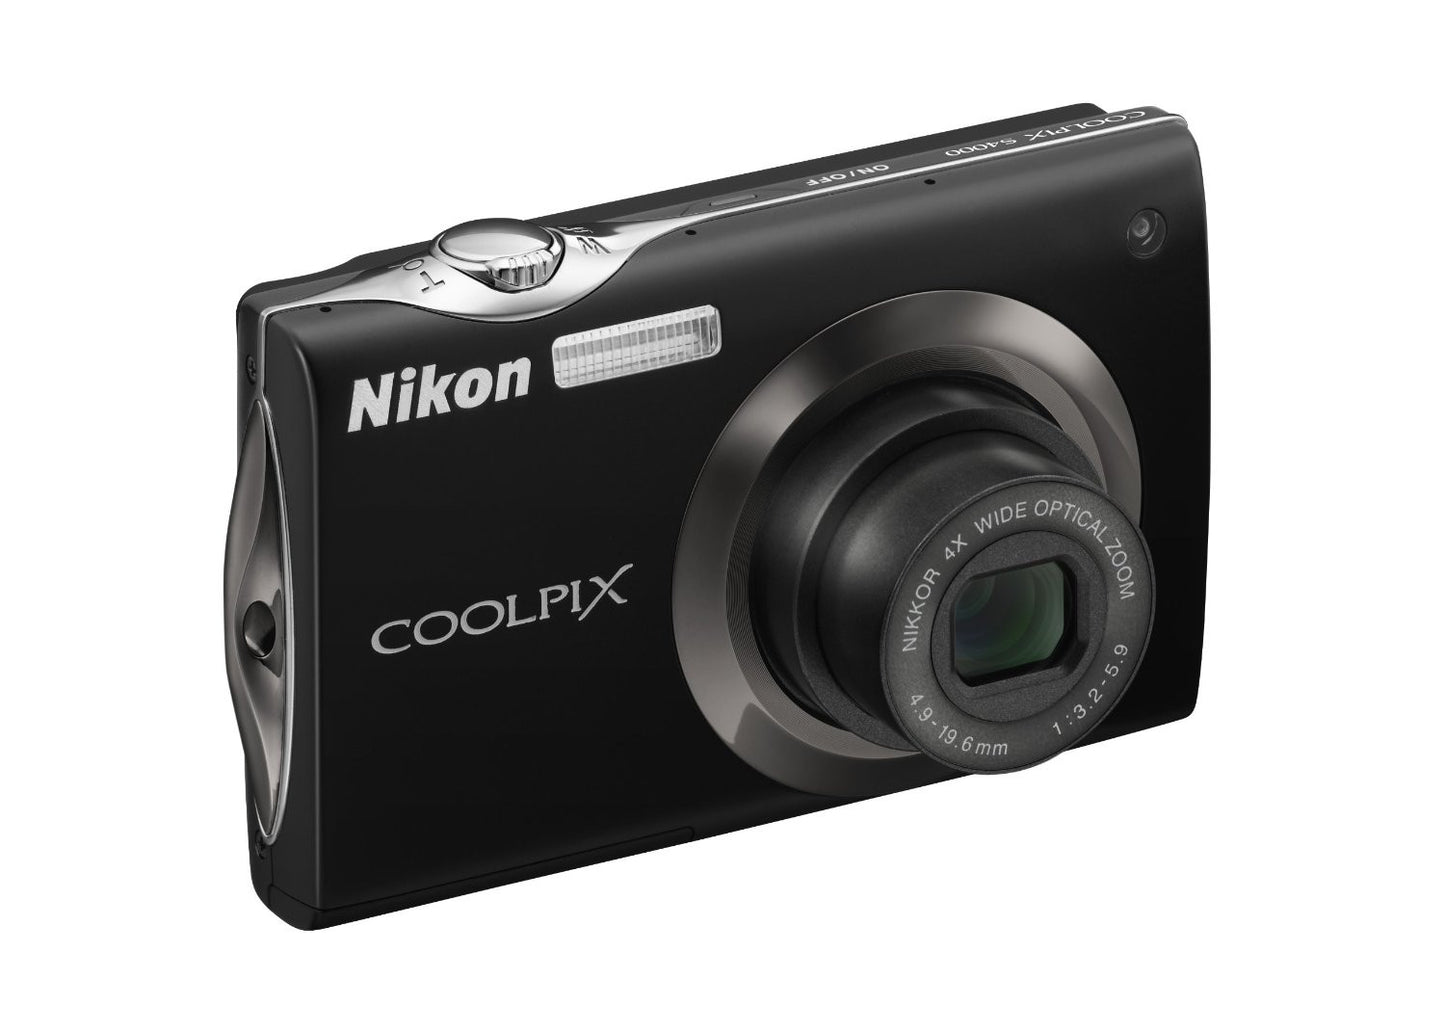 Nikon Coolpix S4000 12 MP Digital Camera with 4x Optical Vibration Reduction (VR) Zoom and 3.0-Inch Touch-Panel LCD (Black) - worldtradesolution.com
 - 5